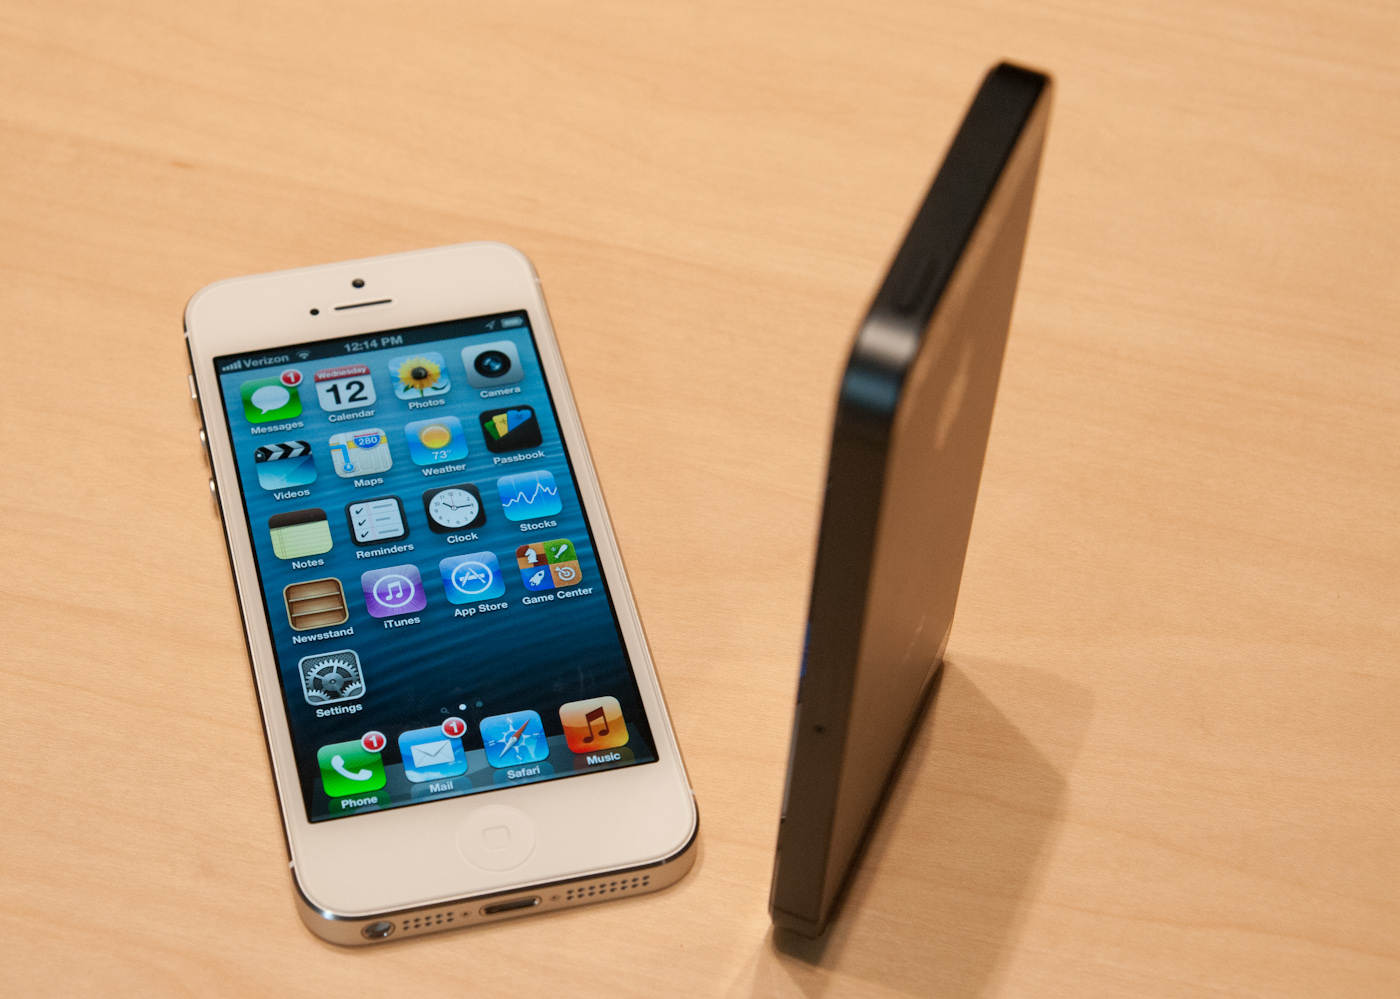 iPhone 5 Hands On Pics and Video - Updated: With Impressions